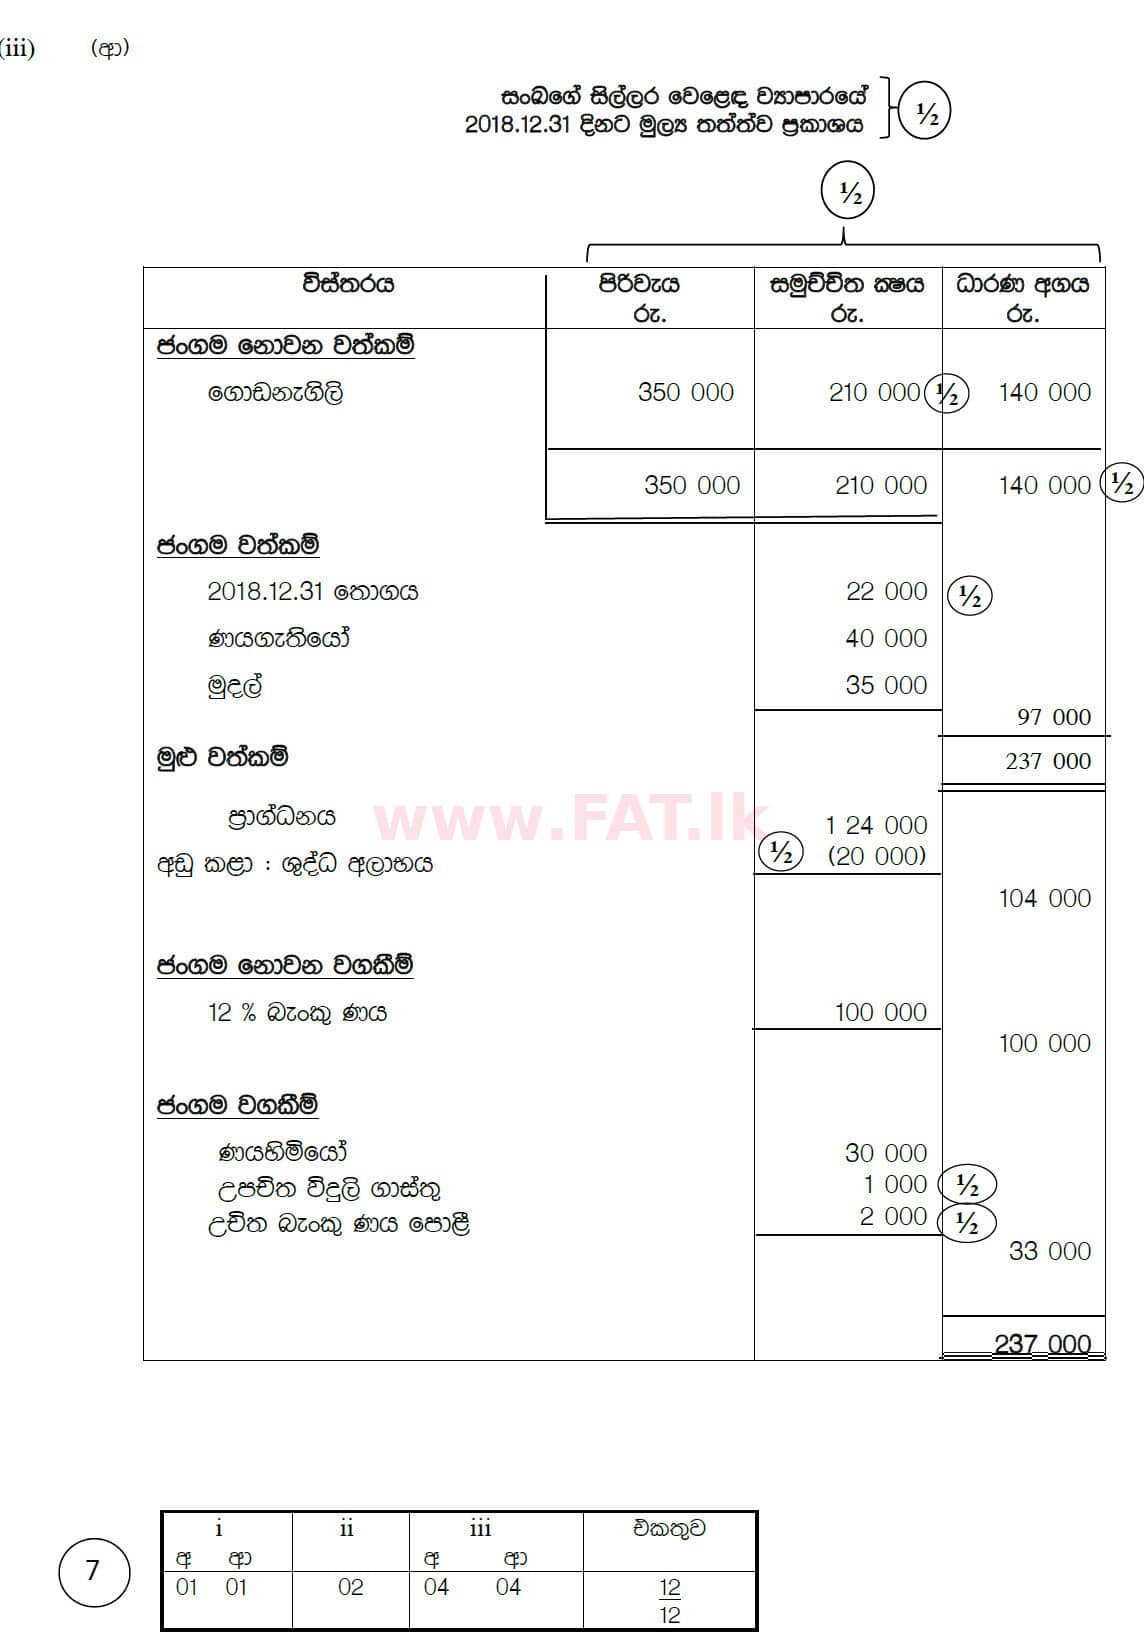 National Syllabus : Ordinary Level (O/L) Business and Accounting Studies - 2019 March - Paper II (සිංහල Medium) 7 5904